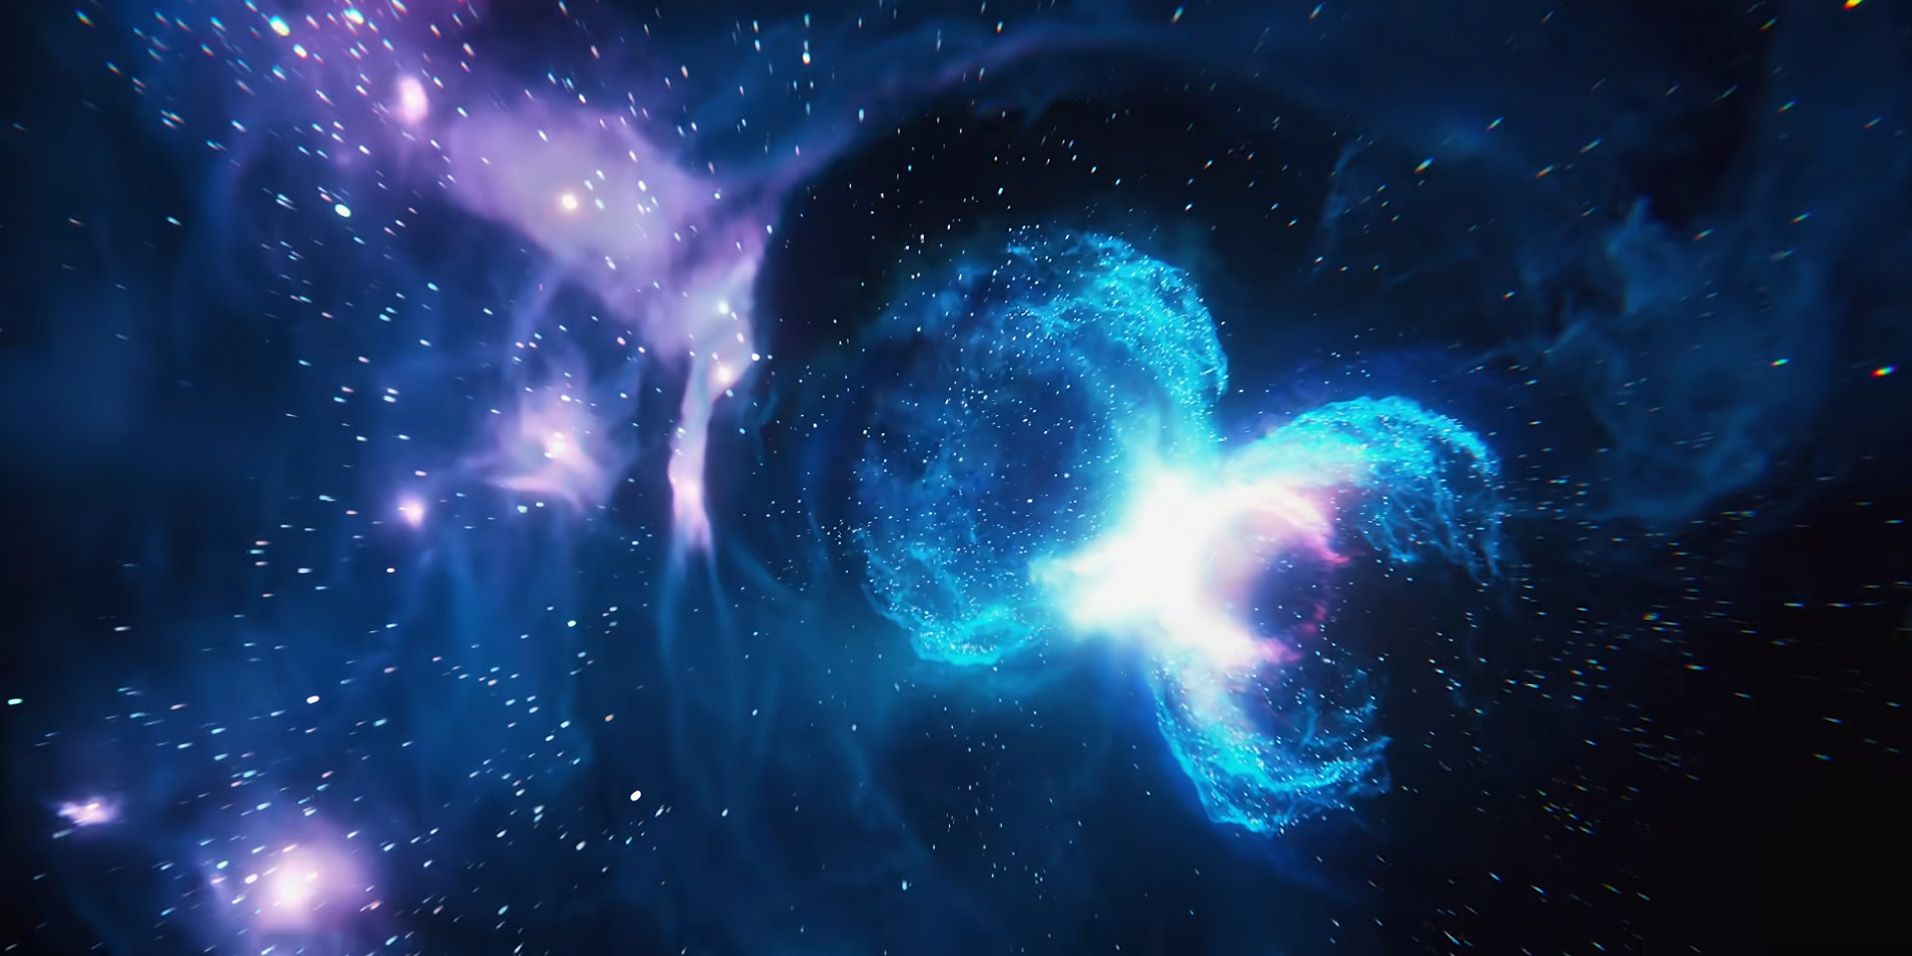 Shot of entering the Milky Way in the 2020 Mass Effect Trailer